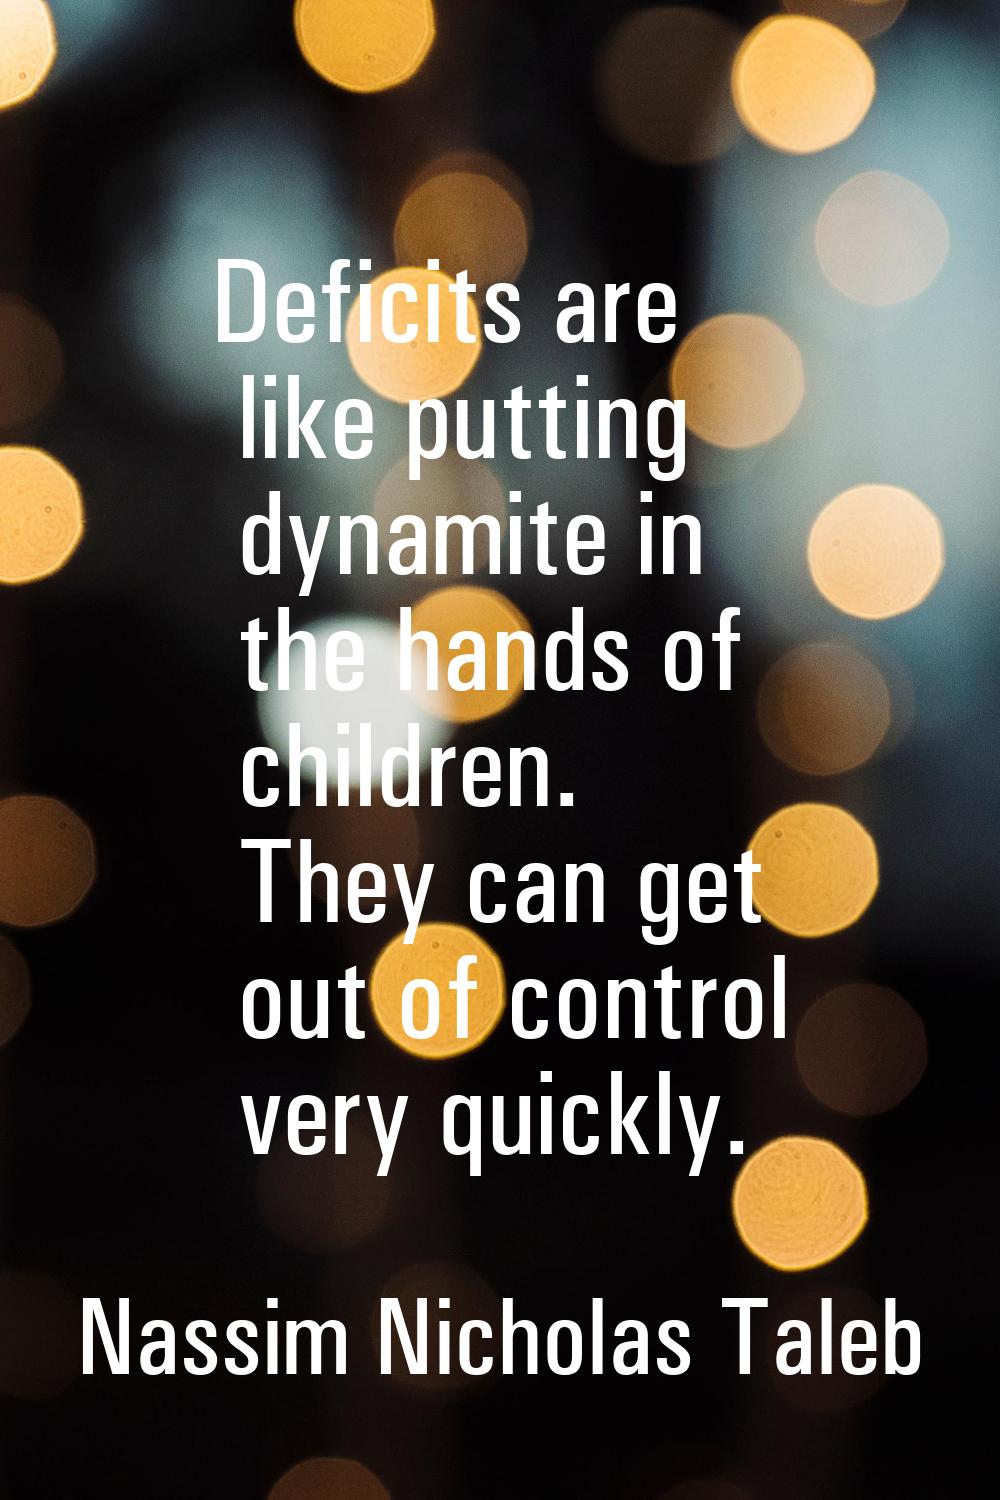 Deficits are like putting dynamite in the hands of children. They can get out of control very quick